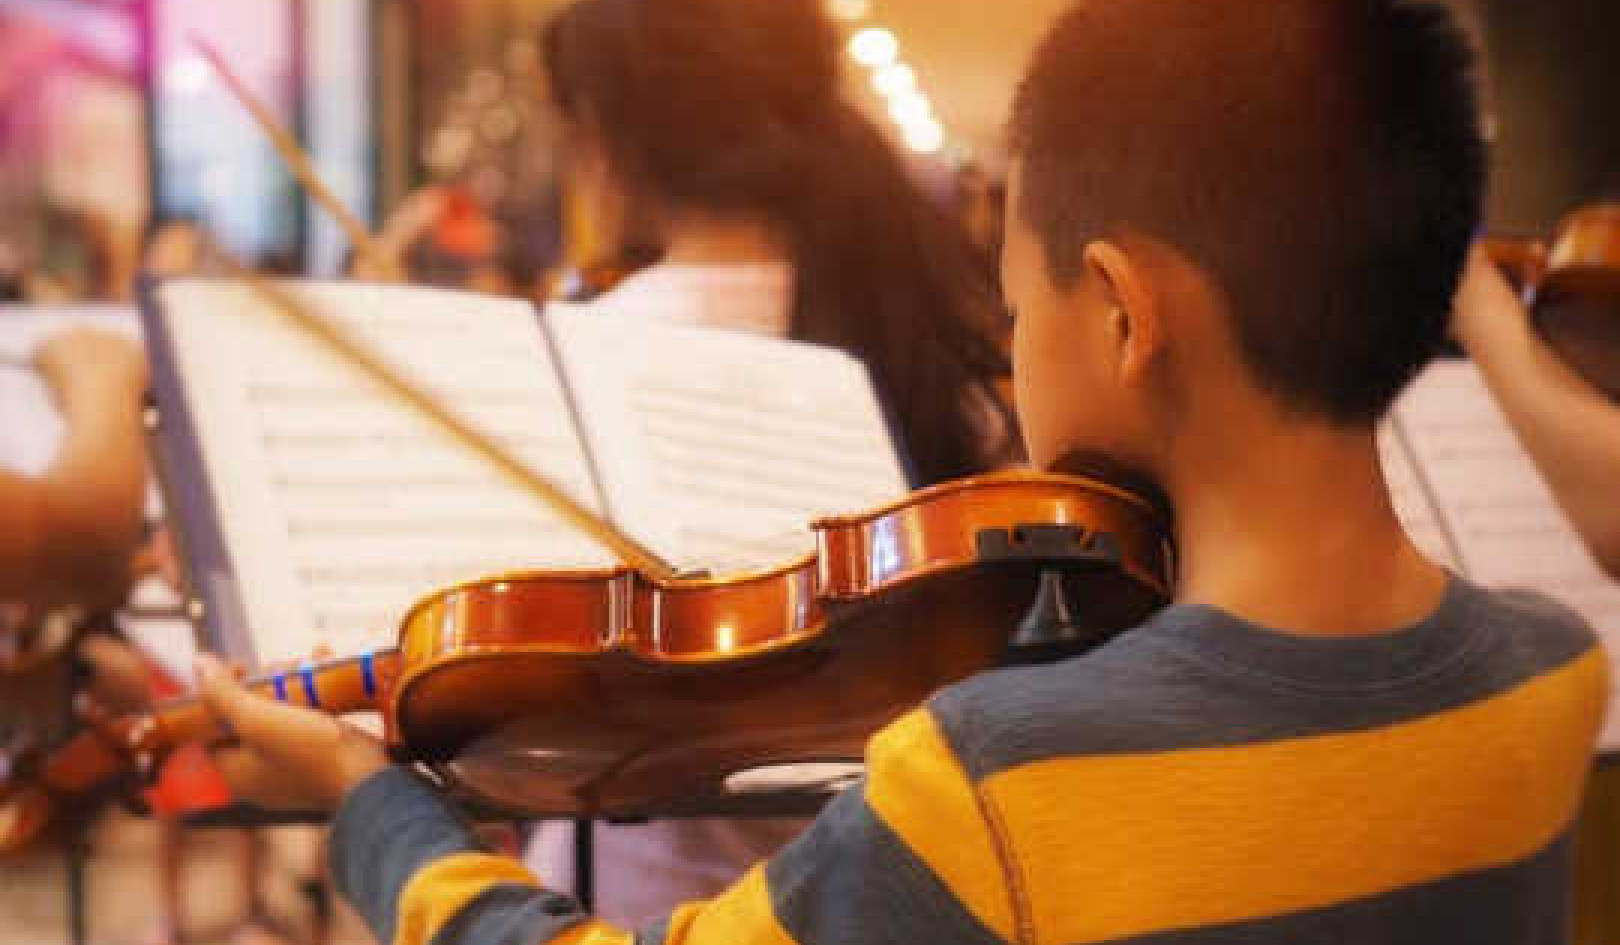 Learning Music Early Can Make Your Child A Better Reader